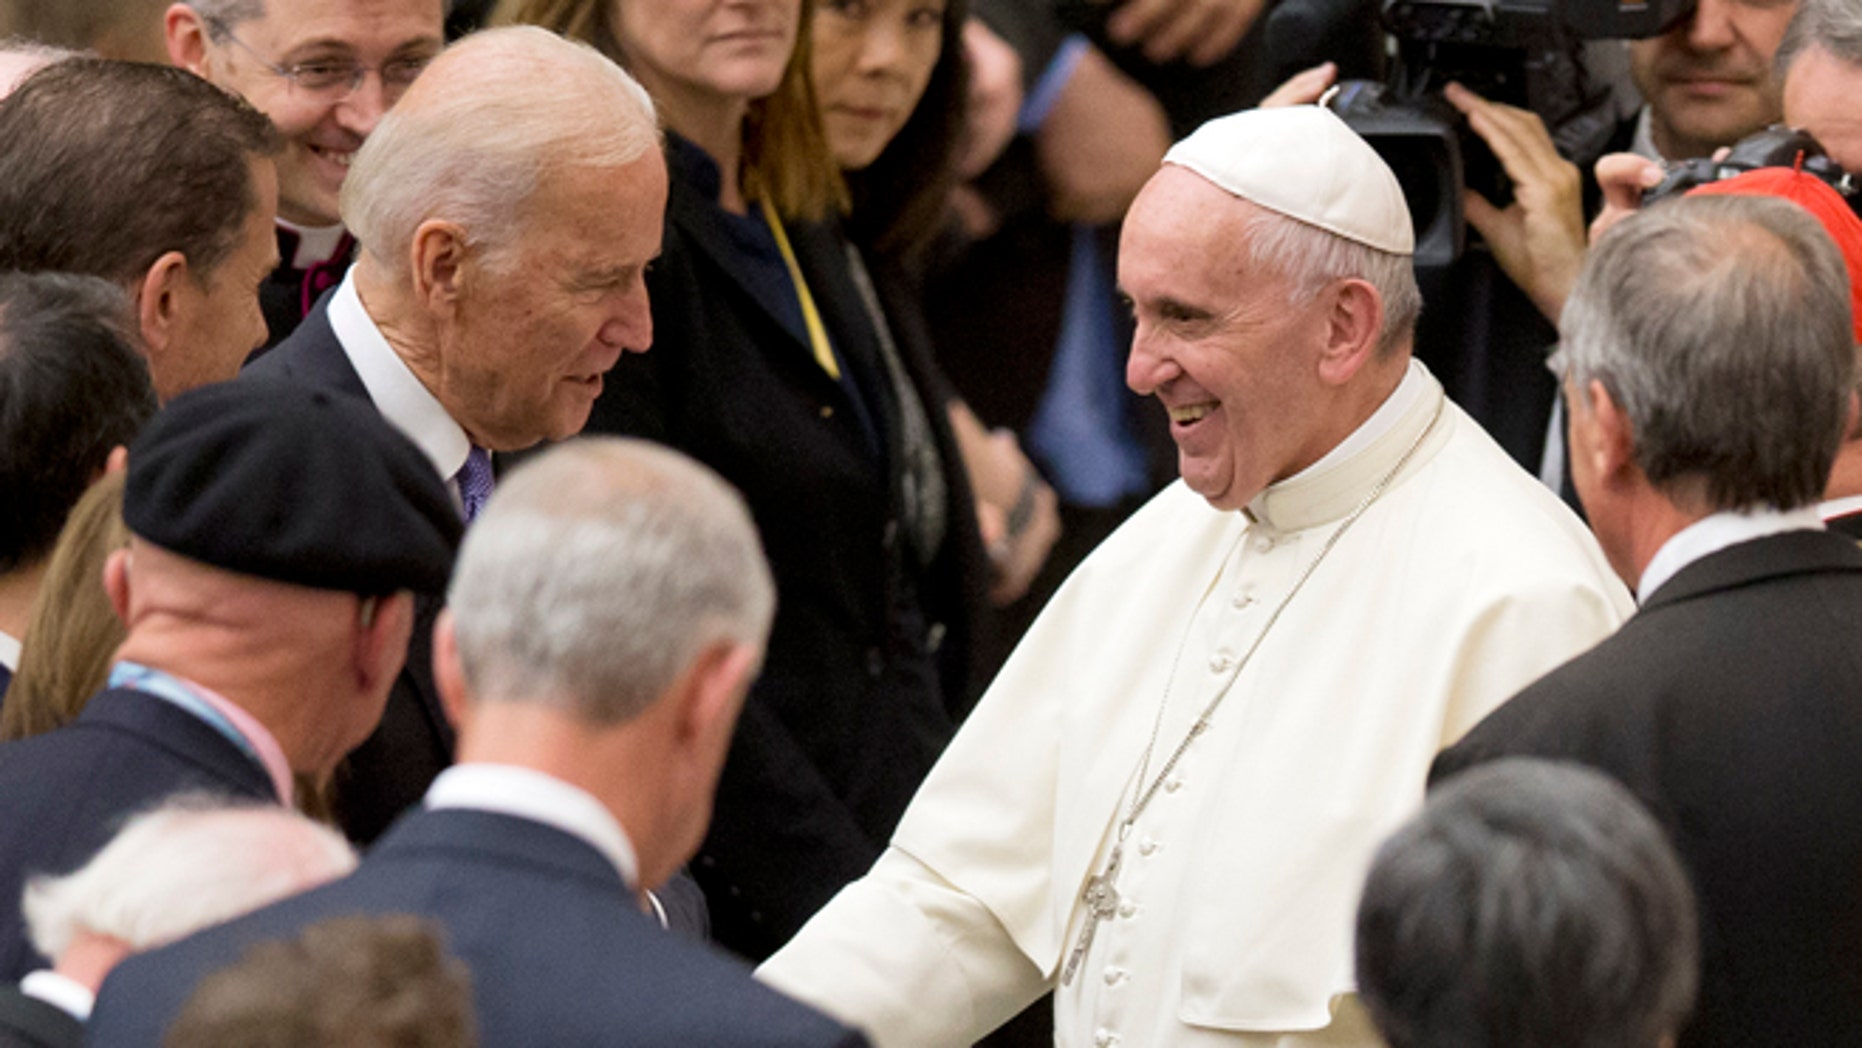 During Vatican Visit Joe Biden Urges World Leaders To Find A Cure For